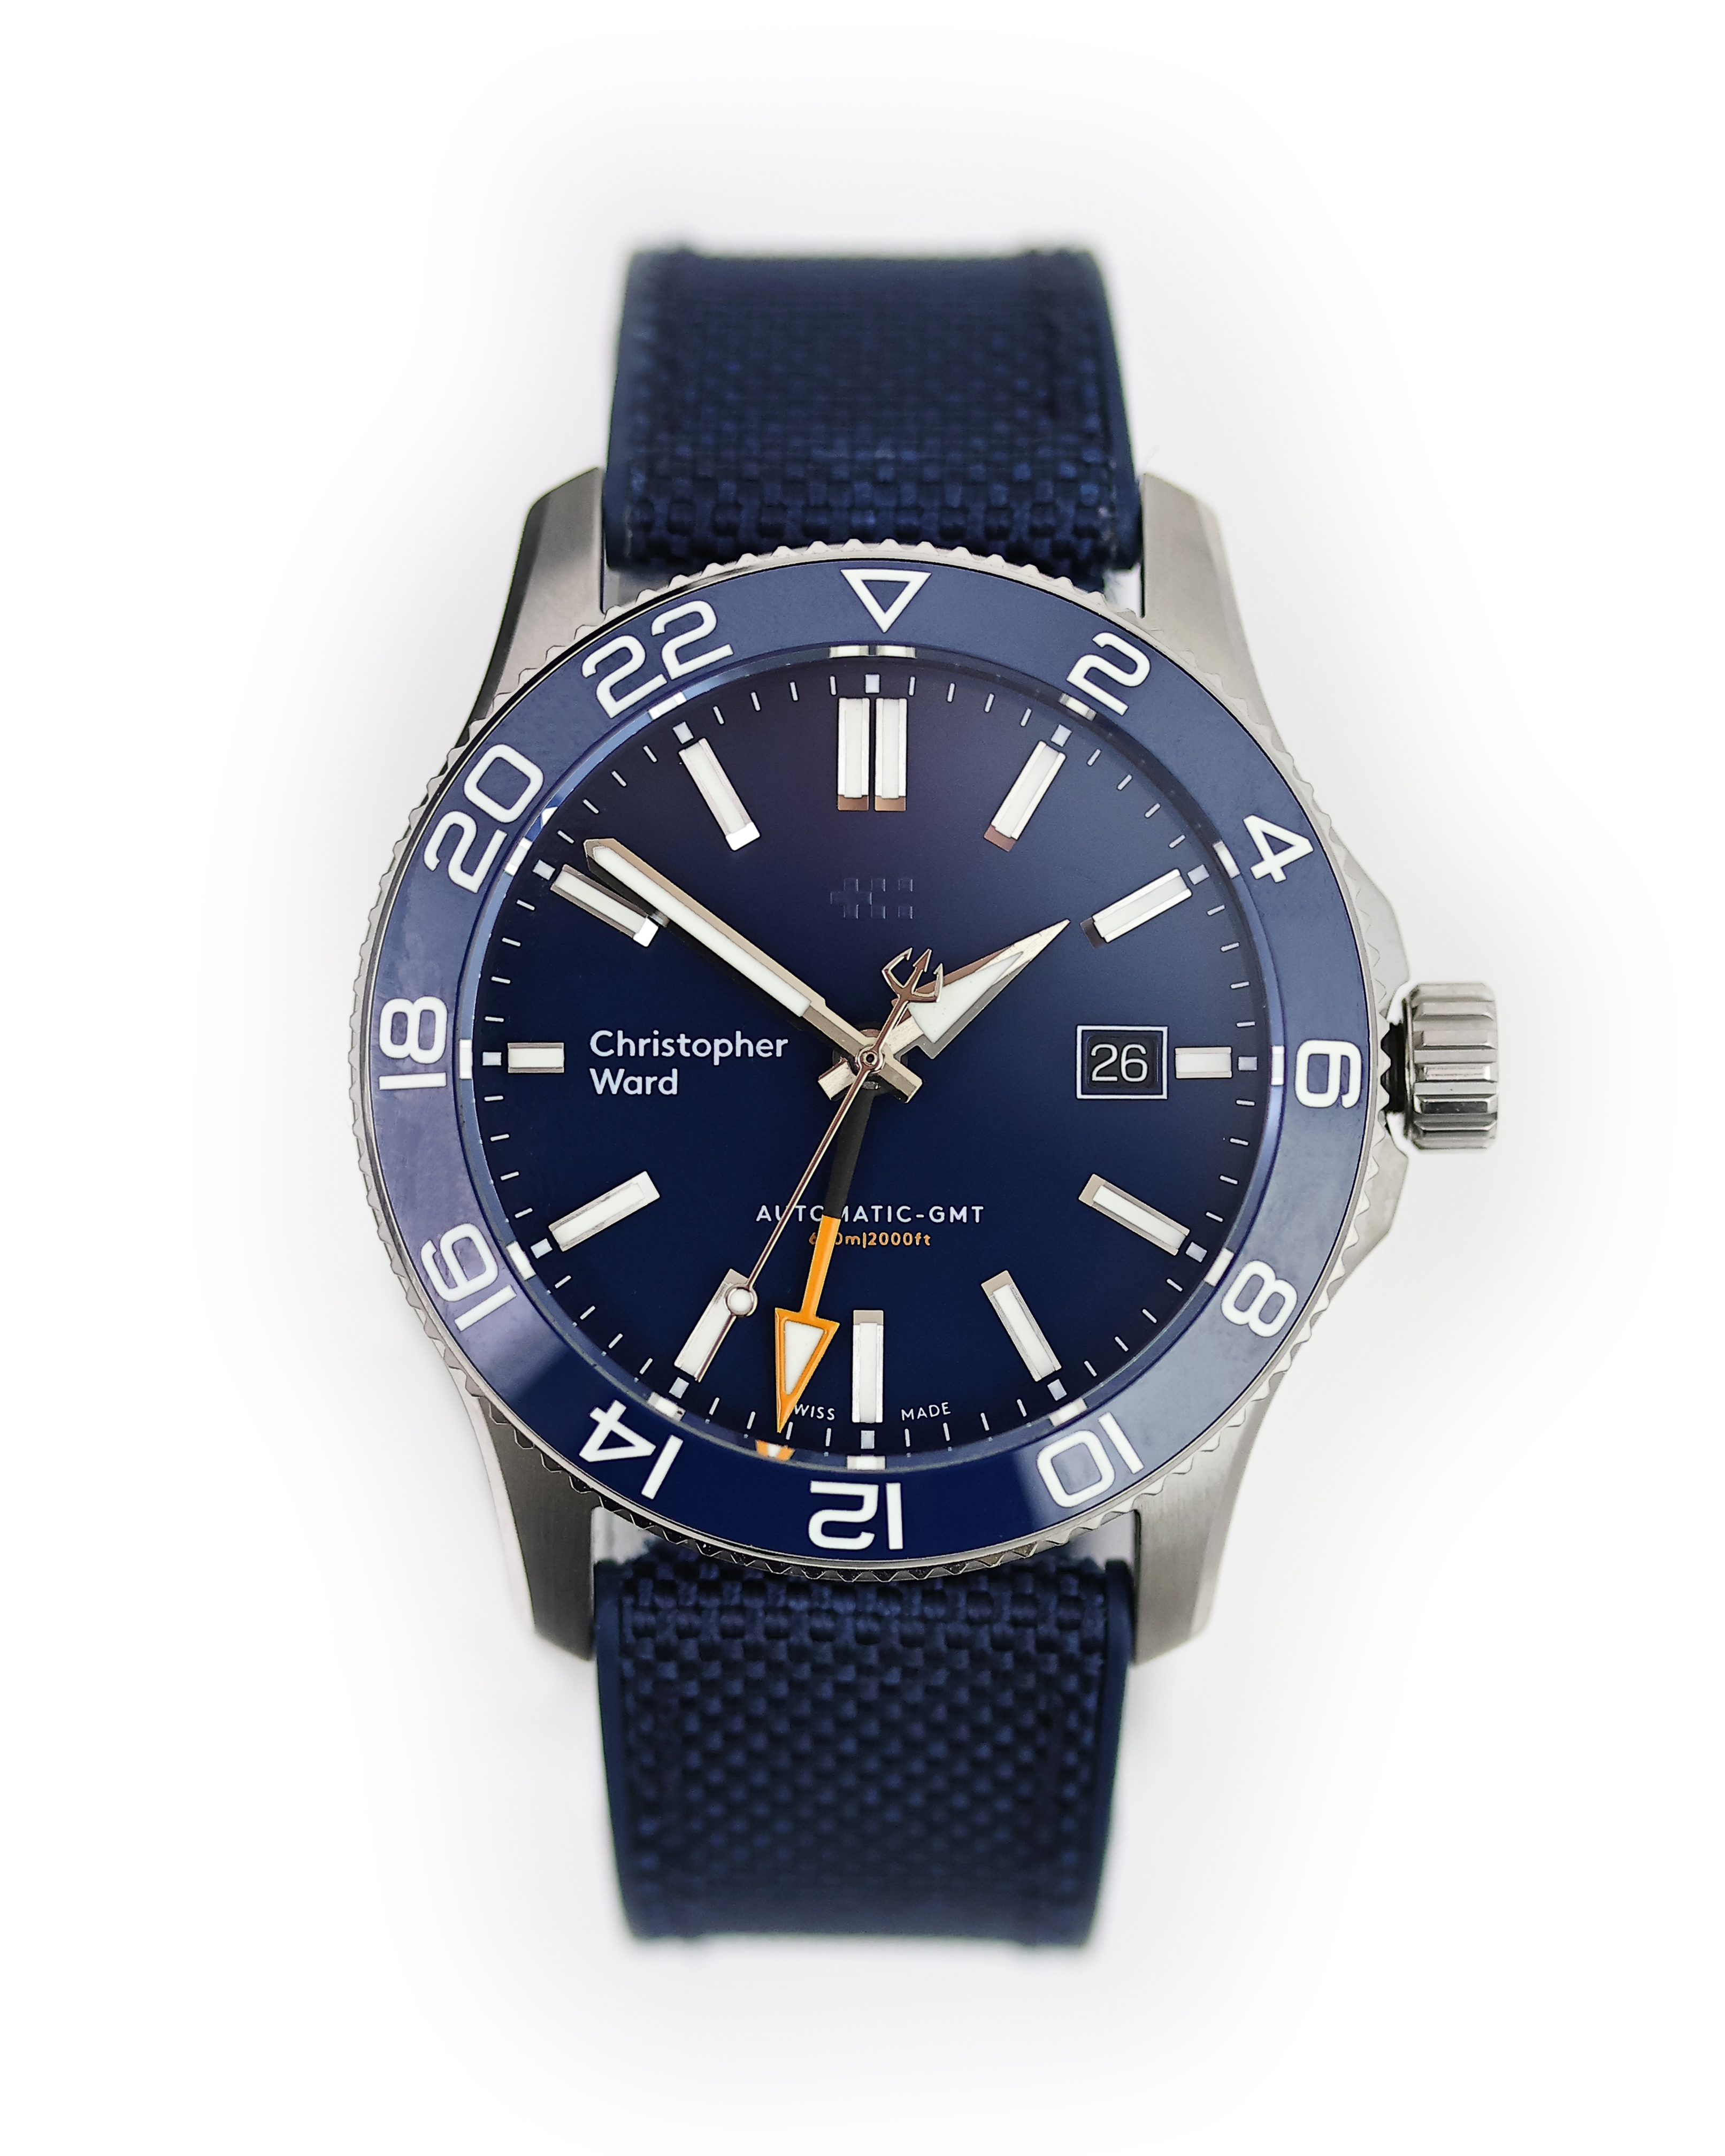 CHRISTOPHER WARD C60 GMT BOX AND PAPERS 2019 - Image 2 of 4